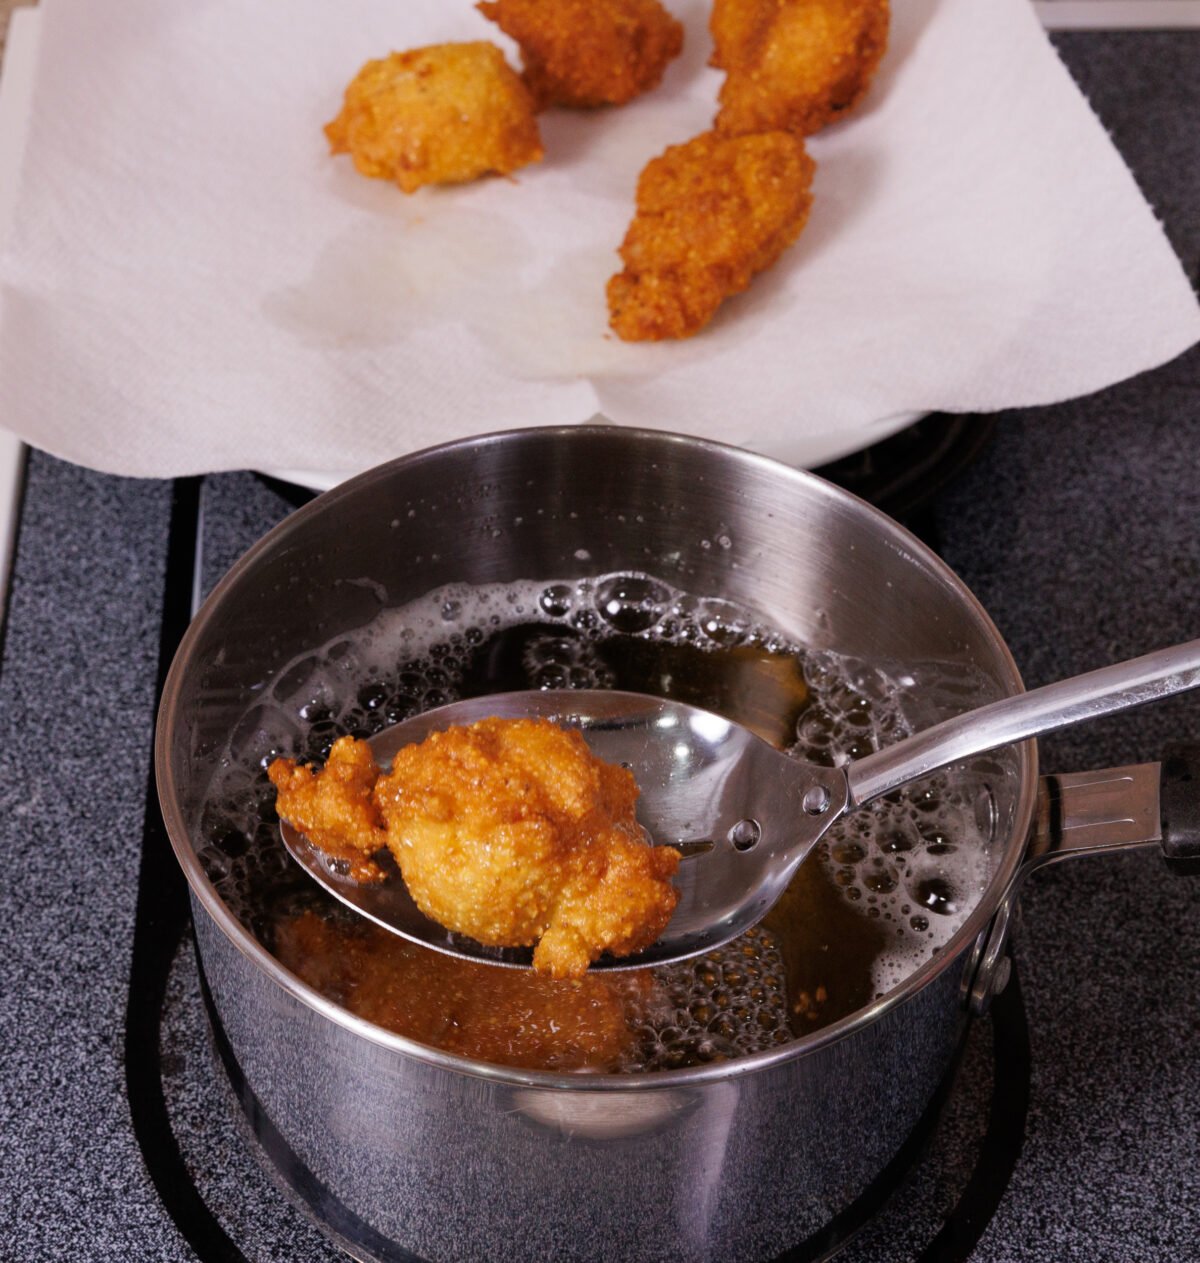 removing fried hushpuppies from a saucepan with a paper towel lined plate in the background.